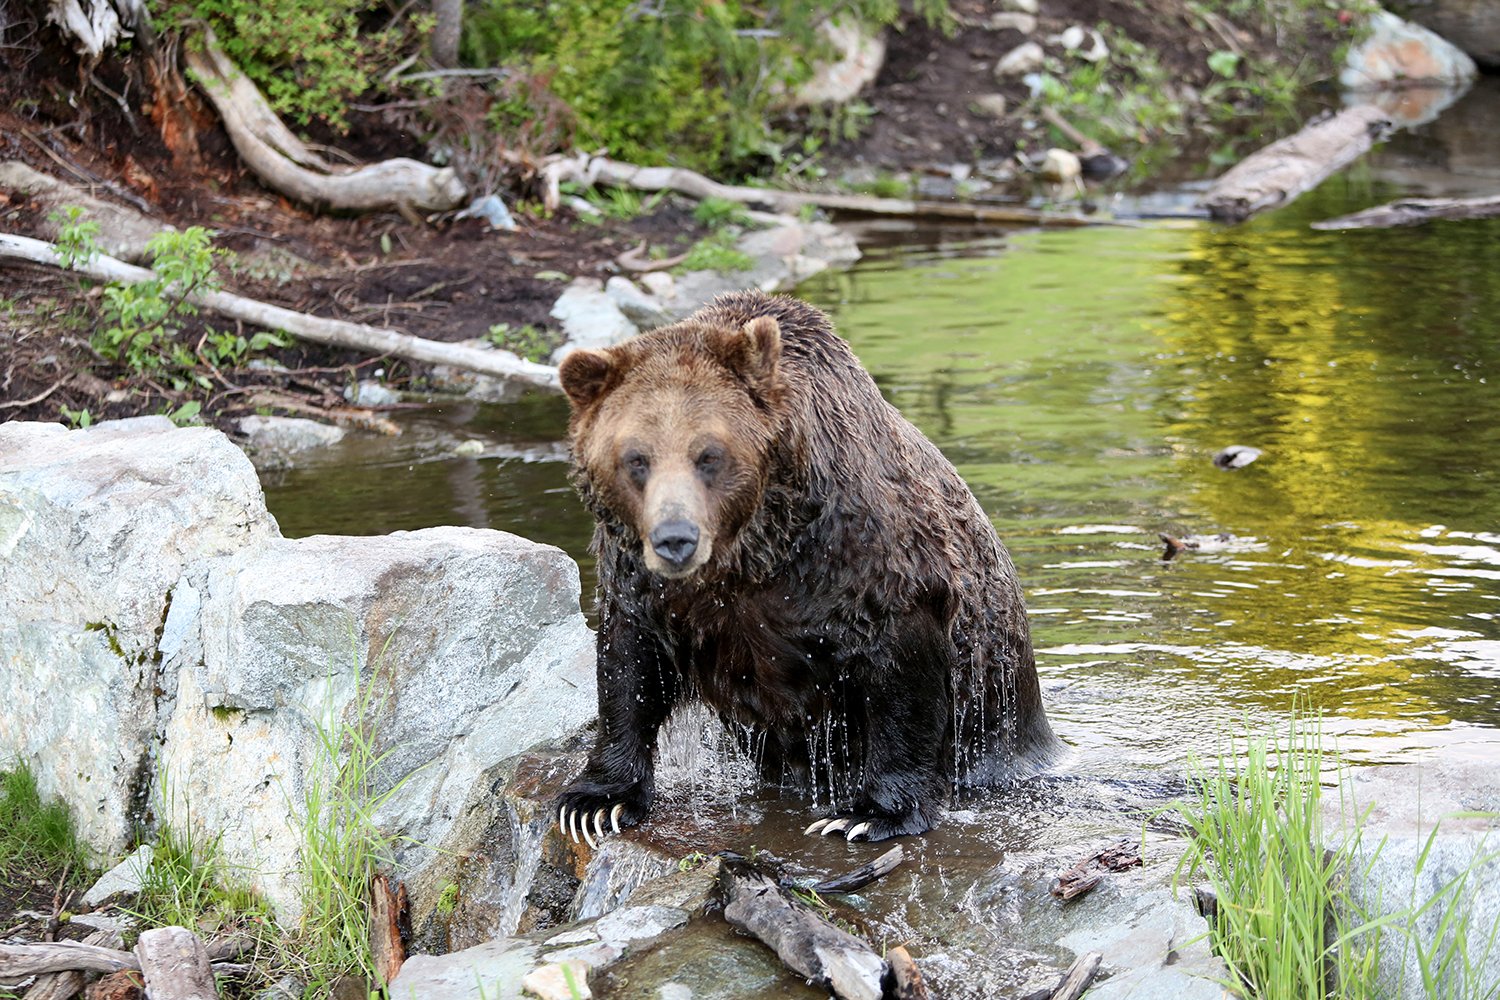 A grizzly bear at Grouse Mountain in Vancouver, British Columbia, Canada